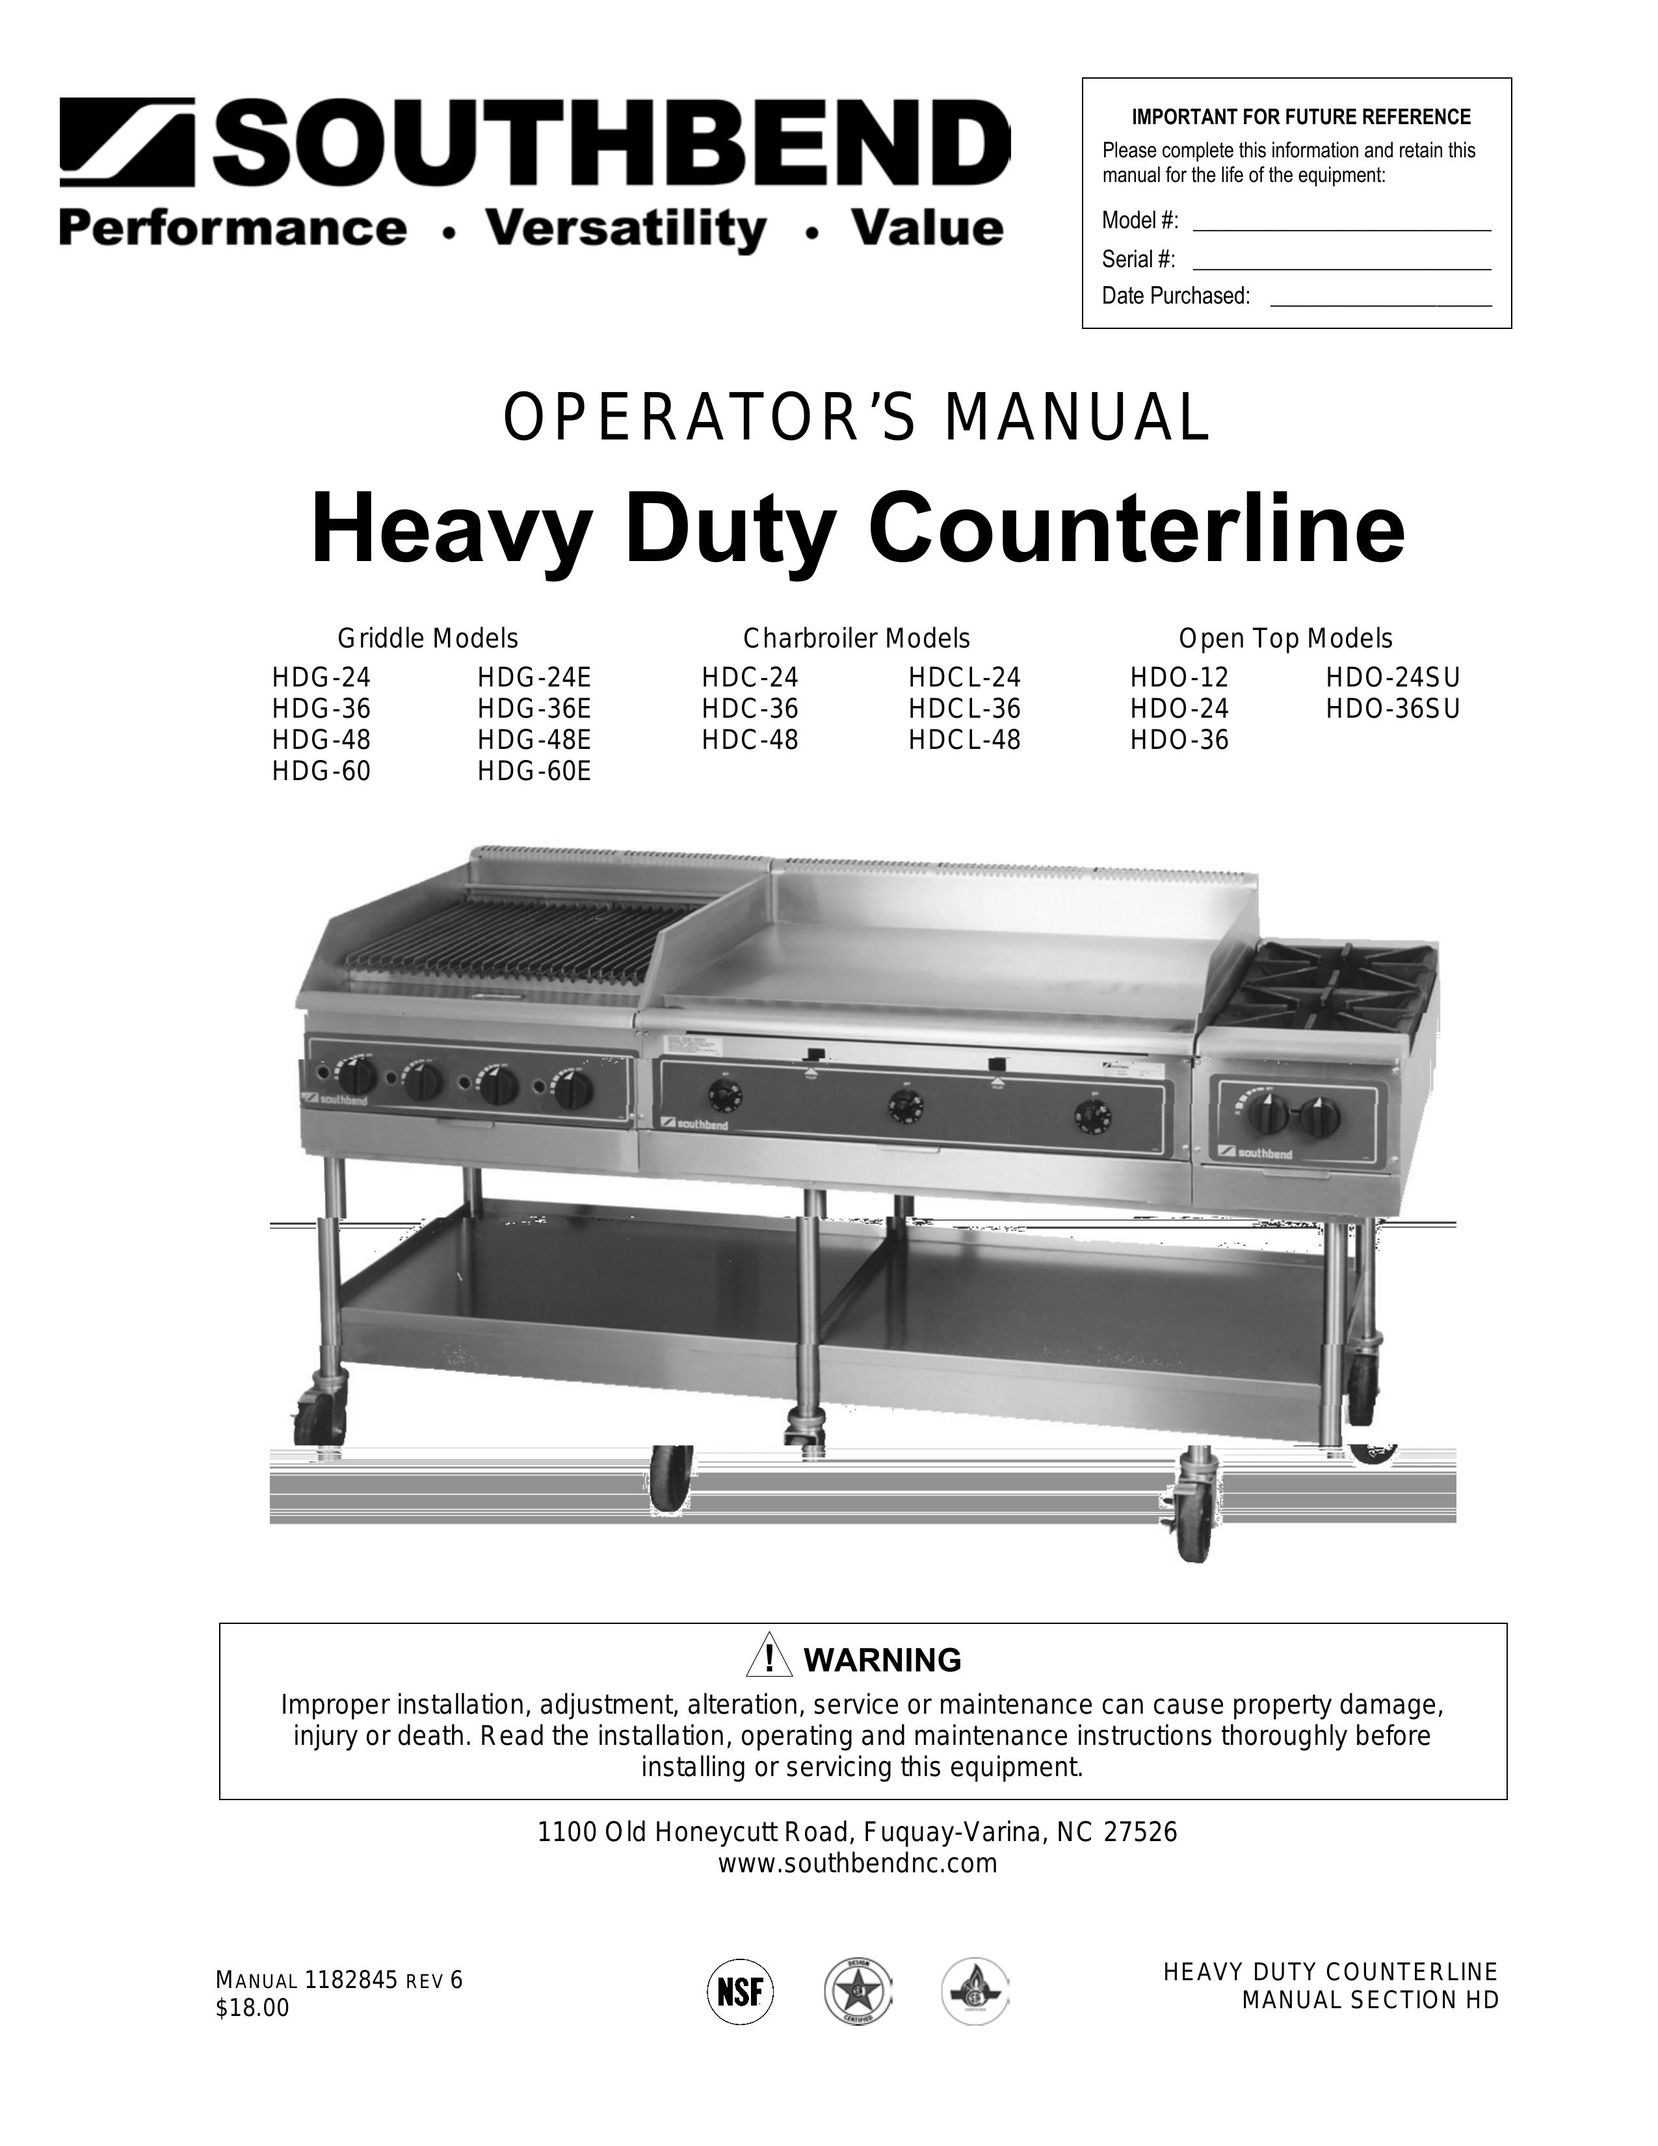 Southbend HDG-24E Cooktop User Manual